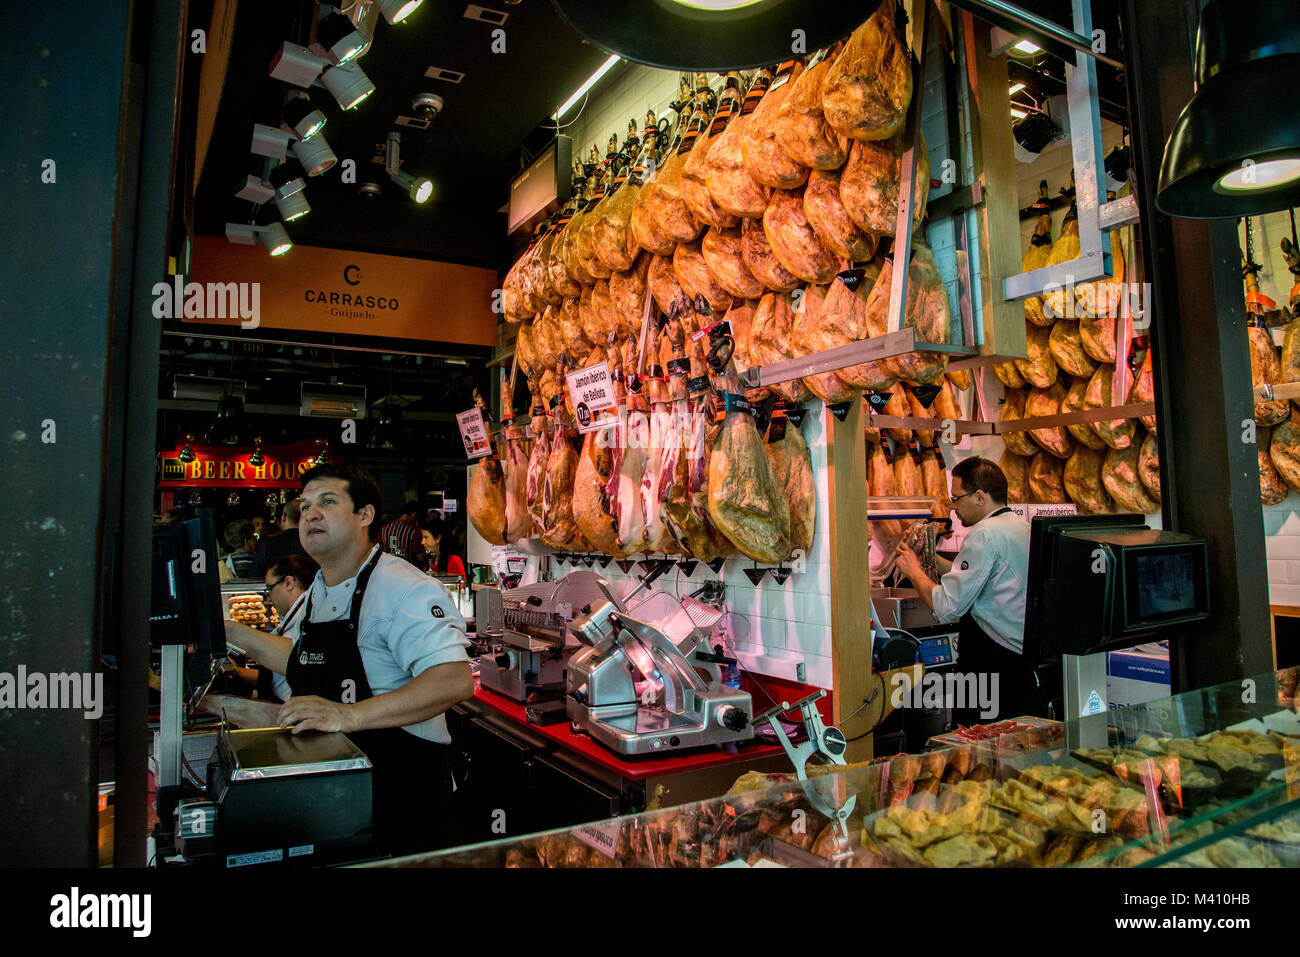 Iberico hams hangs in the ceiling of a Madrid restaurant on Cuesta San Vicente in central Madrid Stock Photo